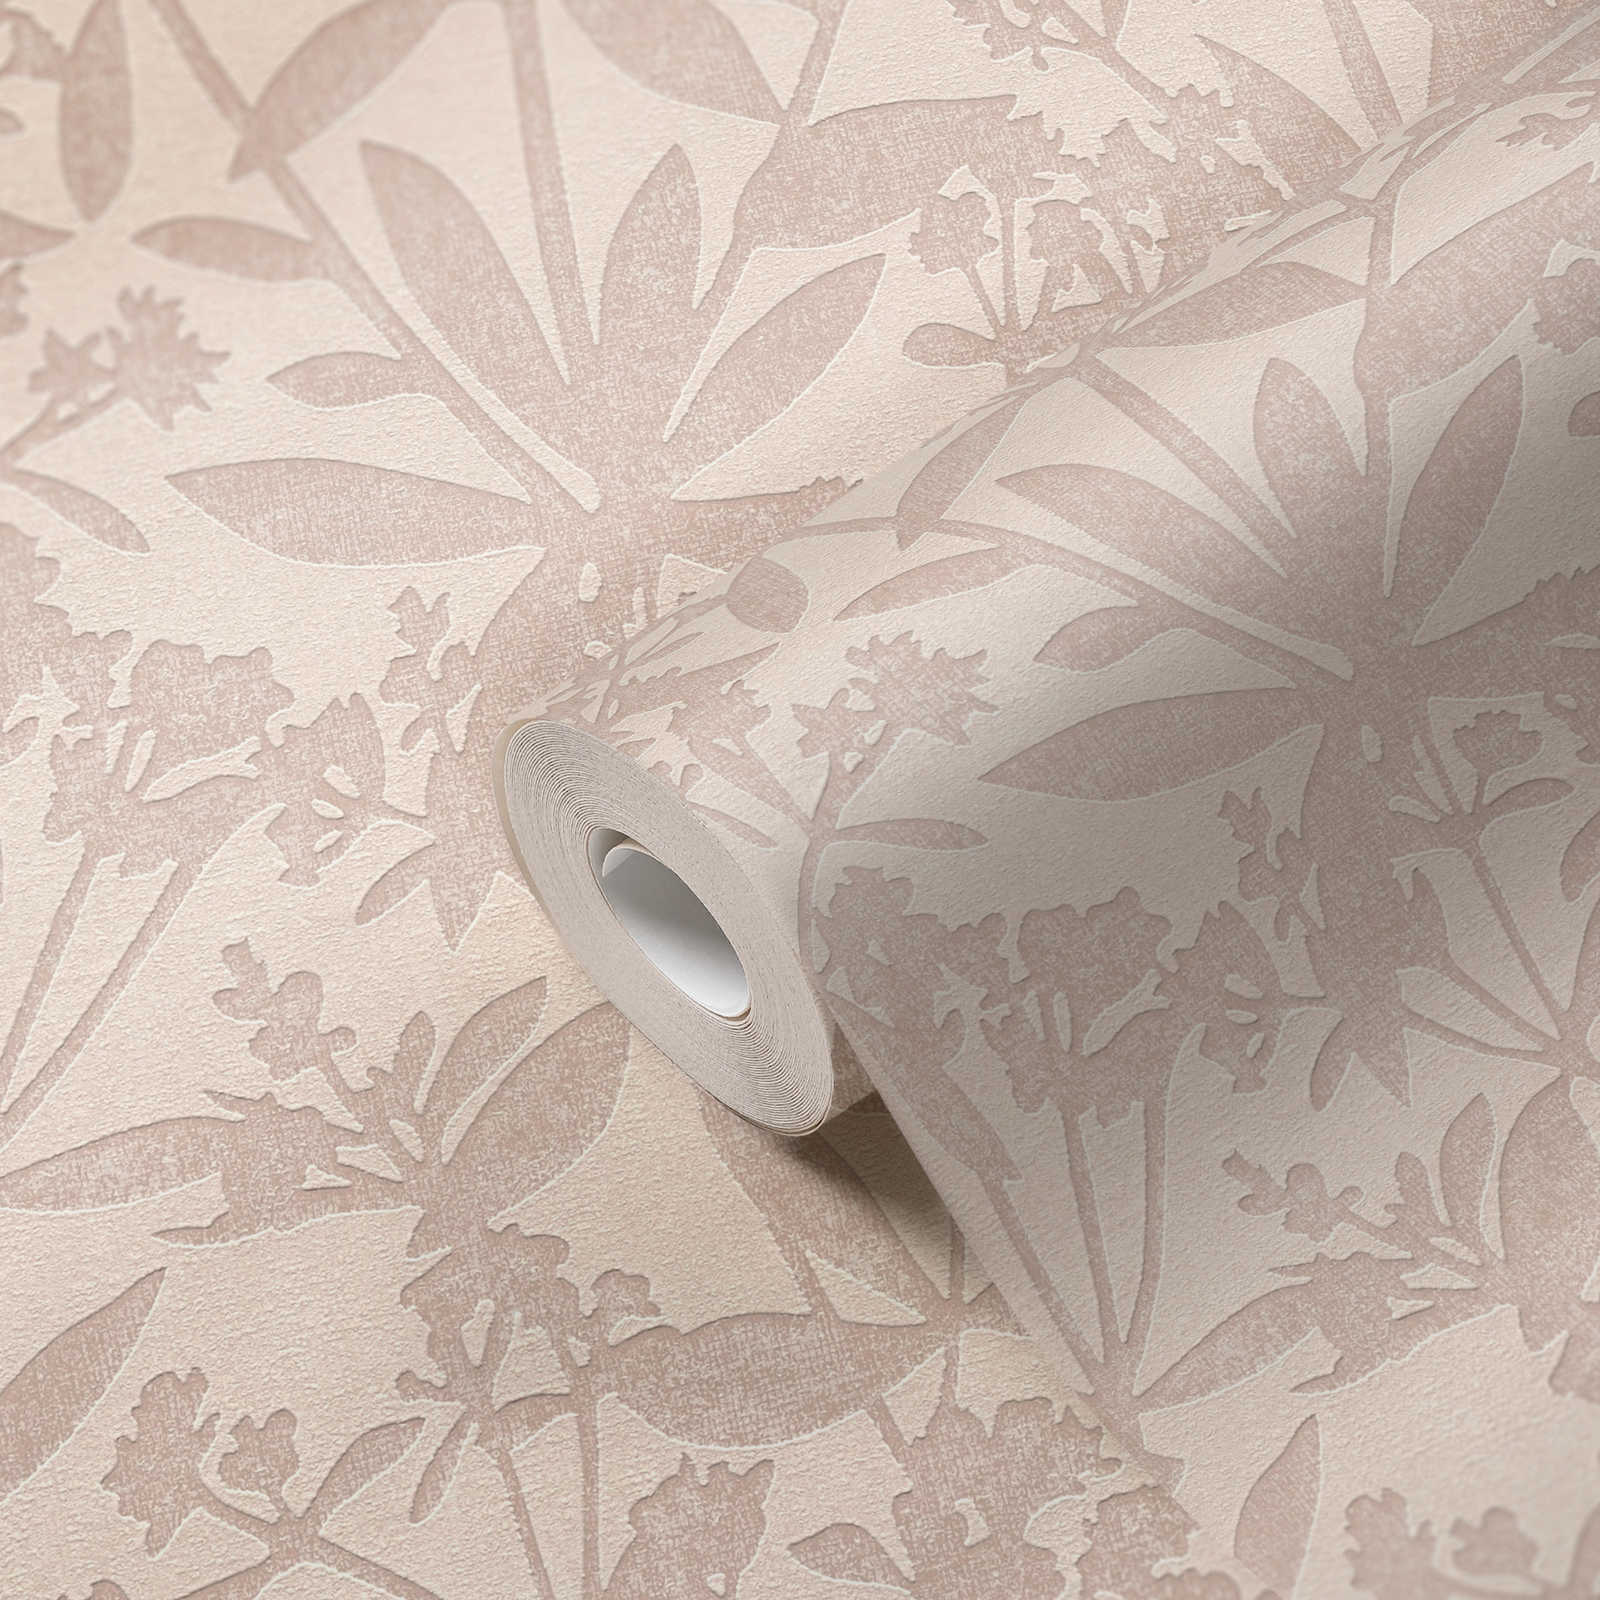             Non-woven wallpaper floral flowers and leaves - cream, beige
        